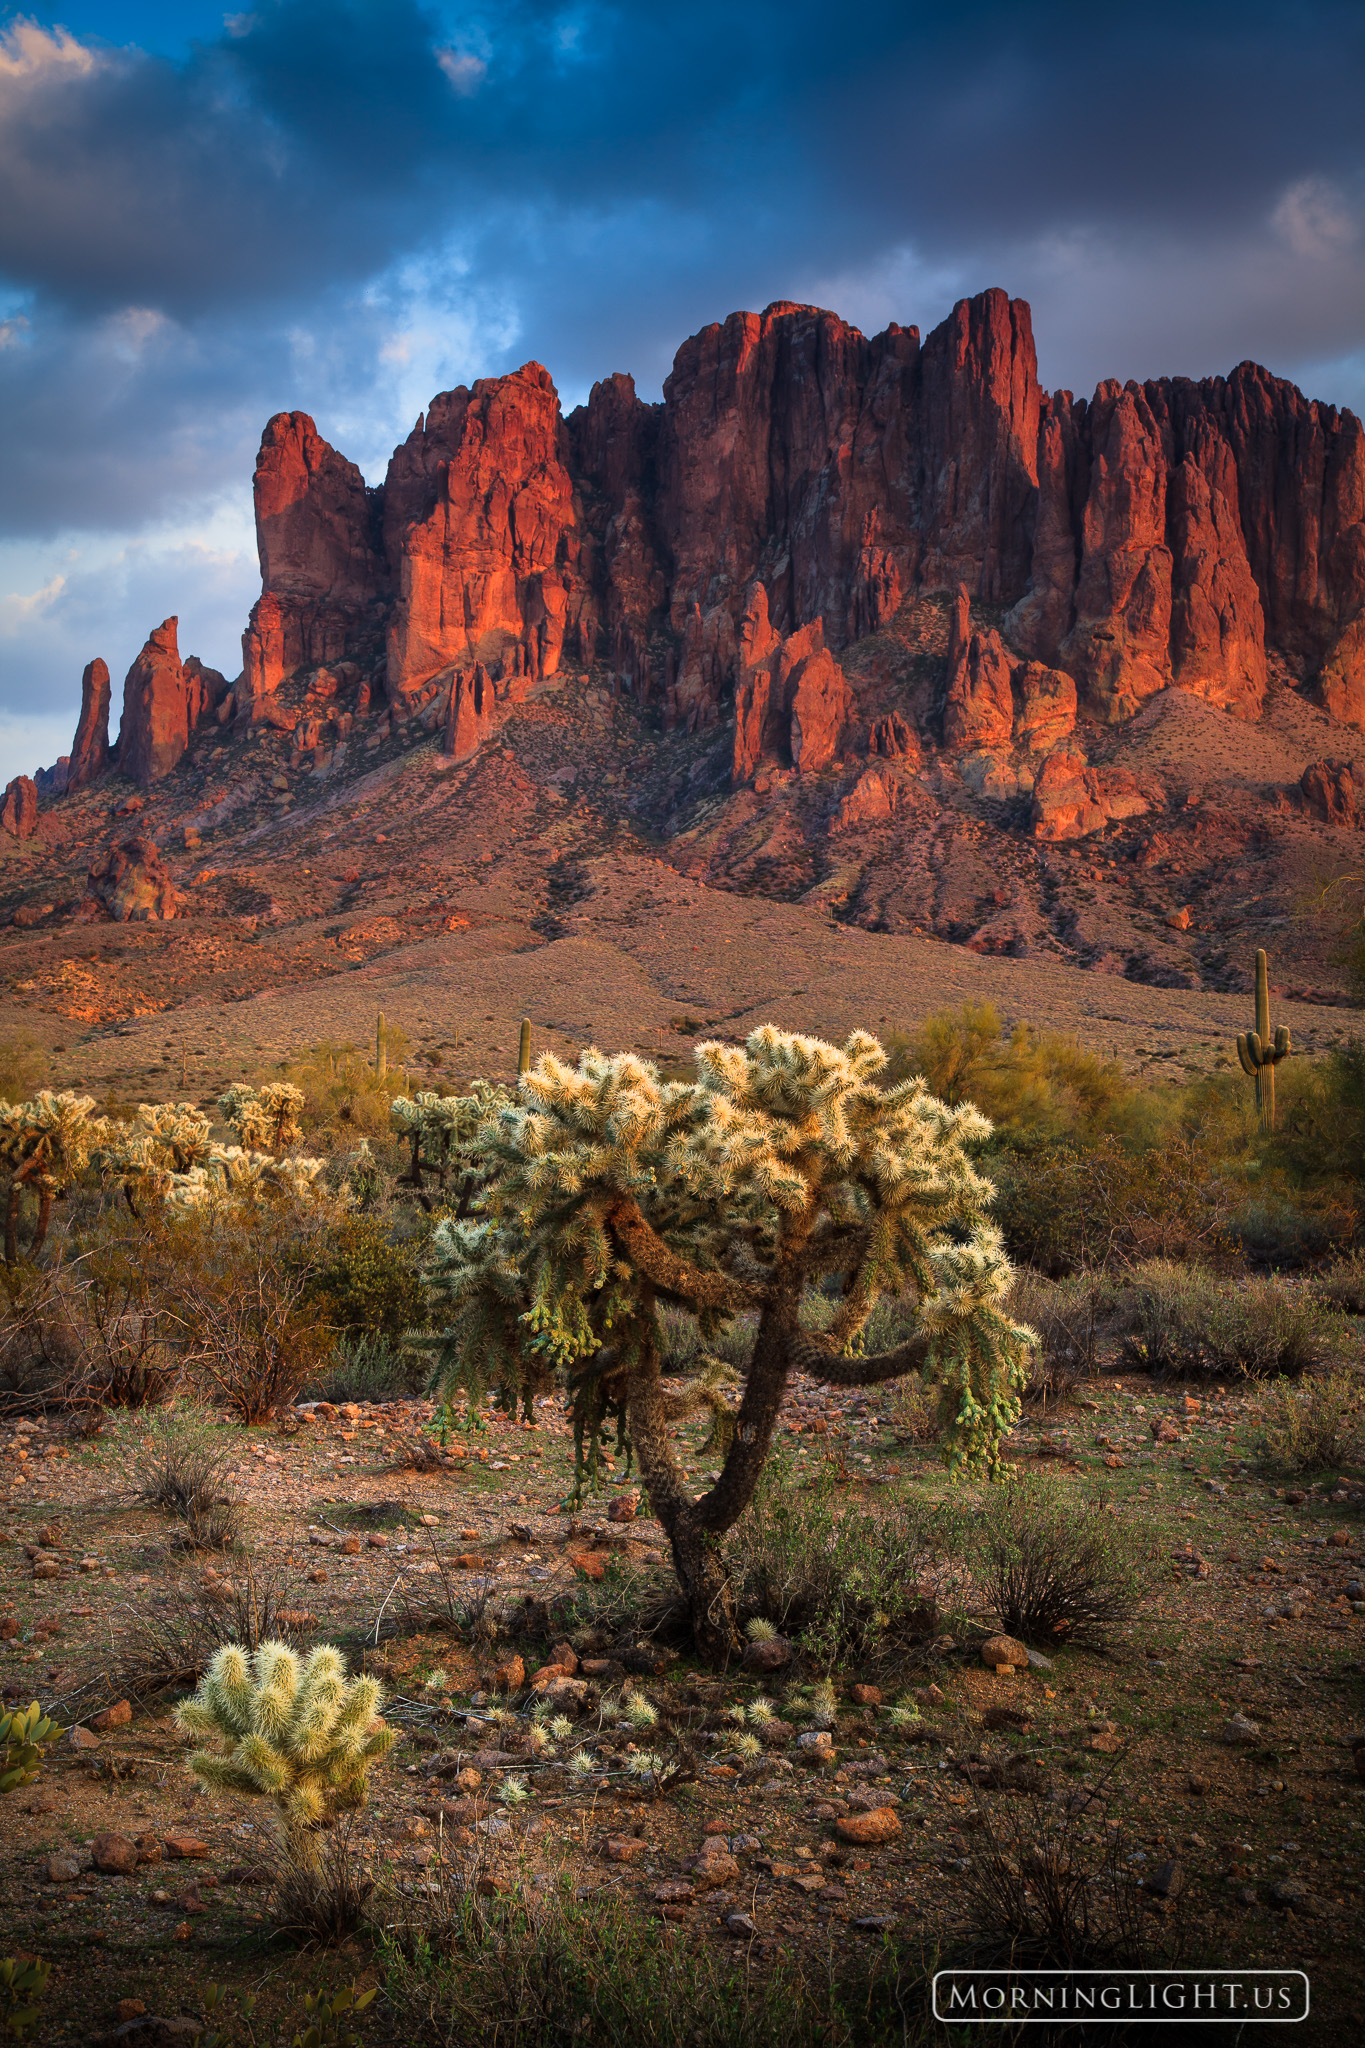 A beautiful sunset at the Superstition Mountains as seen from Lost Dutchman State Park. I chose in this one to emphasize the...